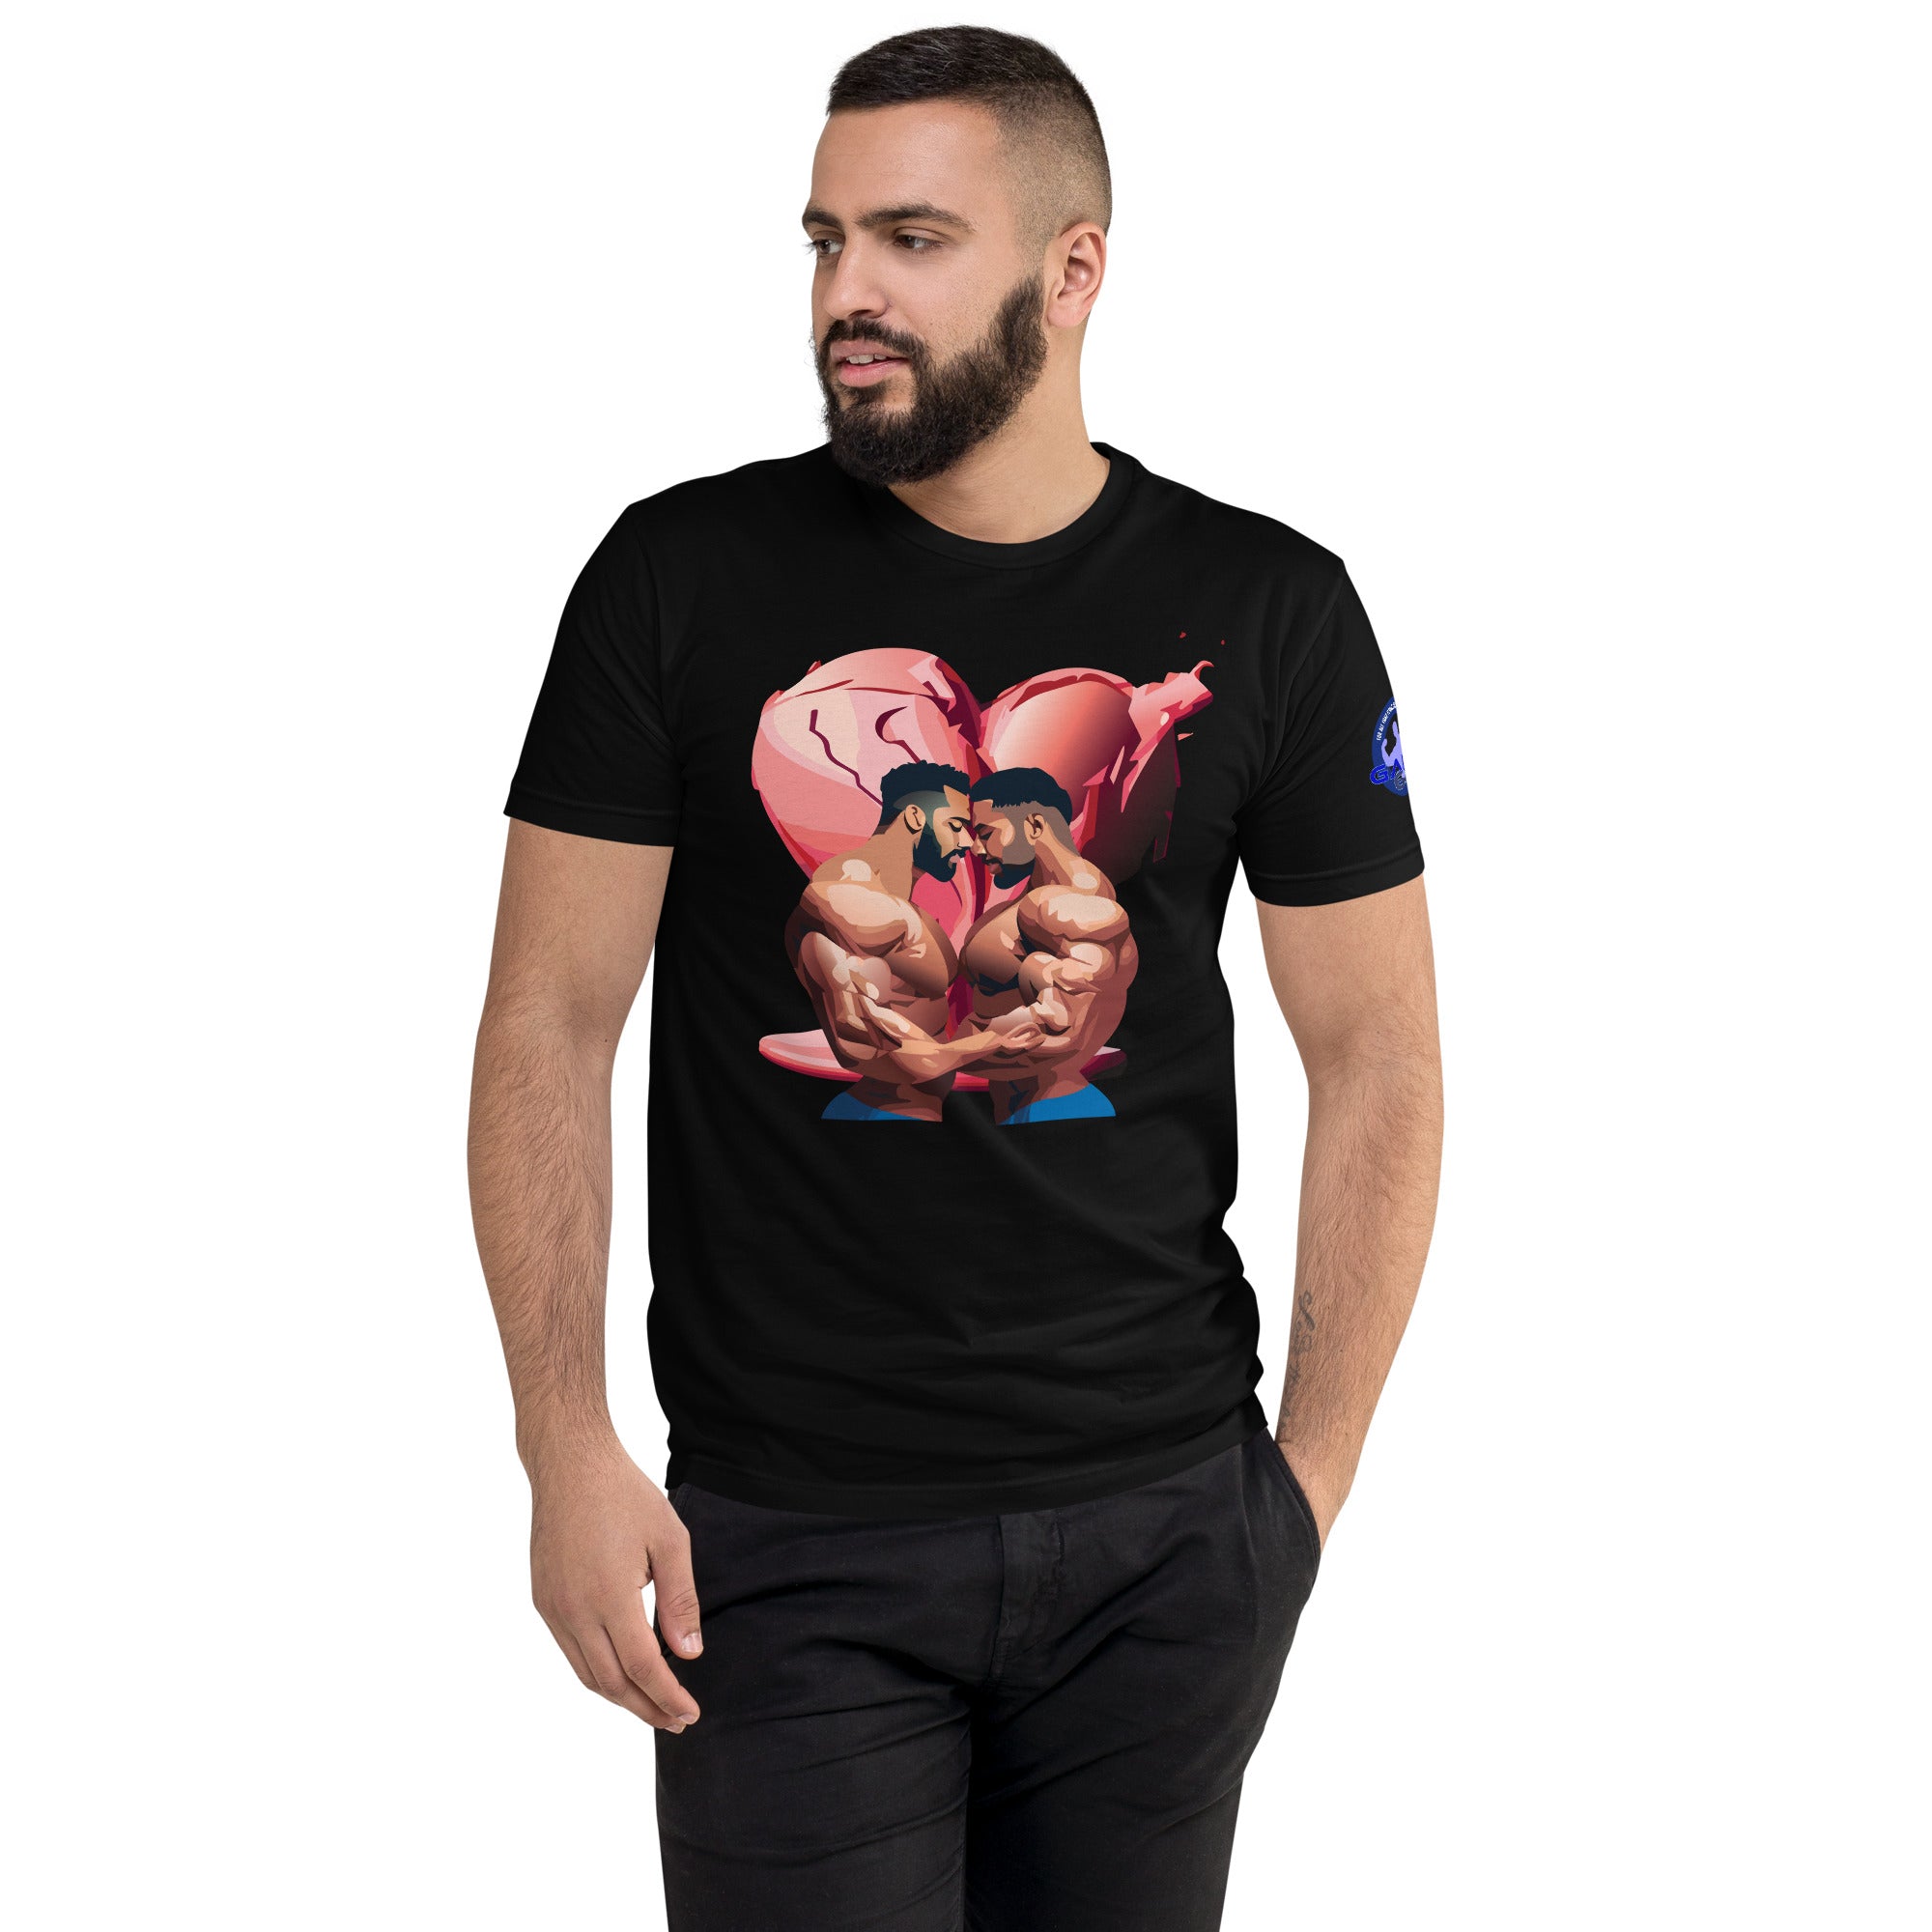 Body Builders in Love Men's Fitted Short Sleeve T-shirt